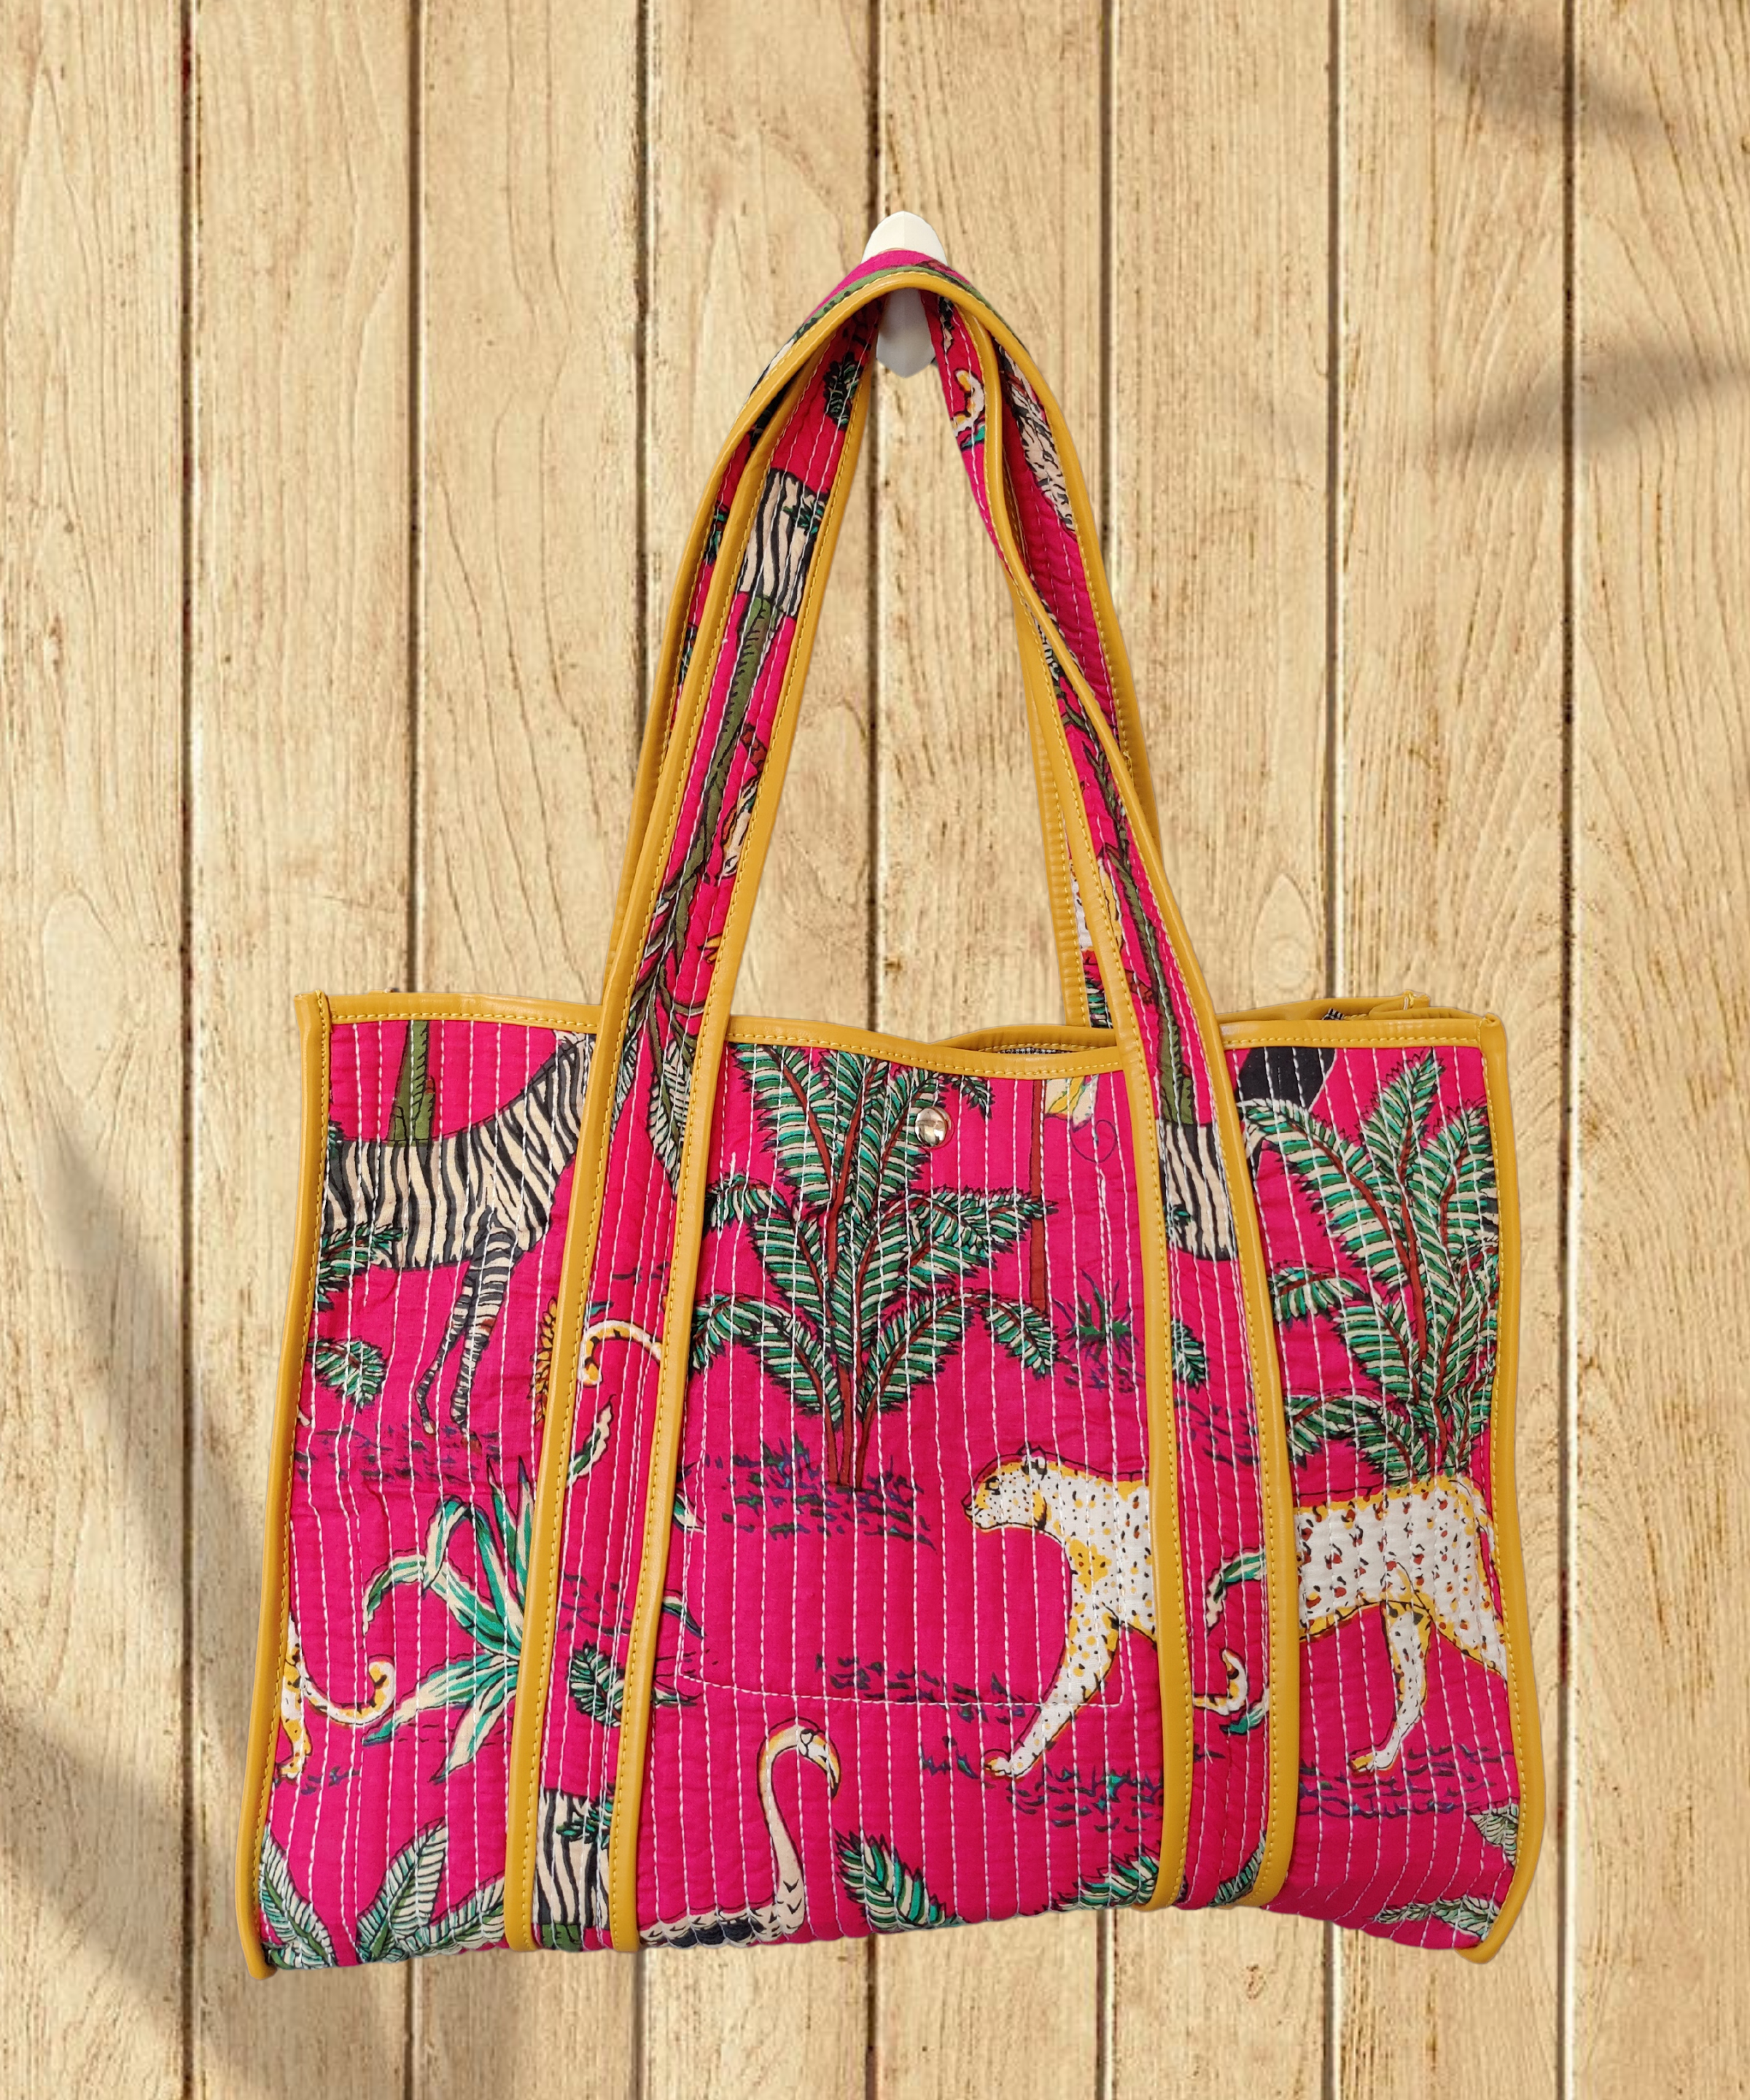 Cotton Bags Tote - Buy Cotton Bags Tote online in India